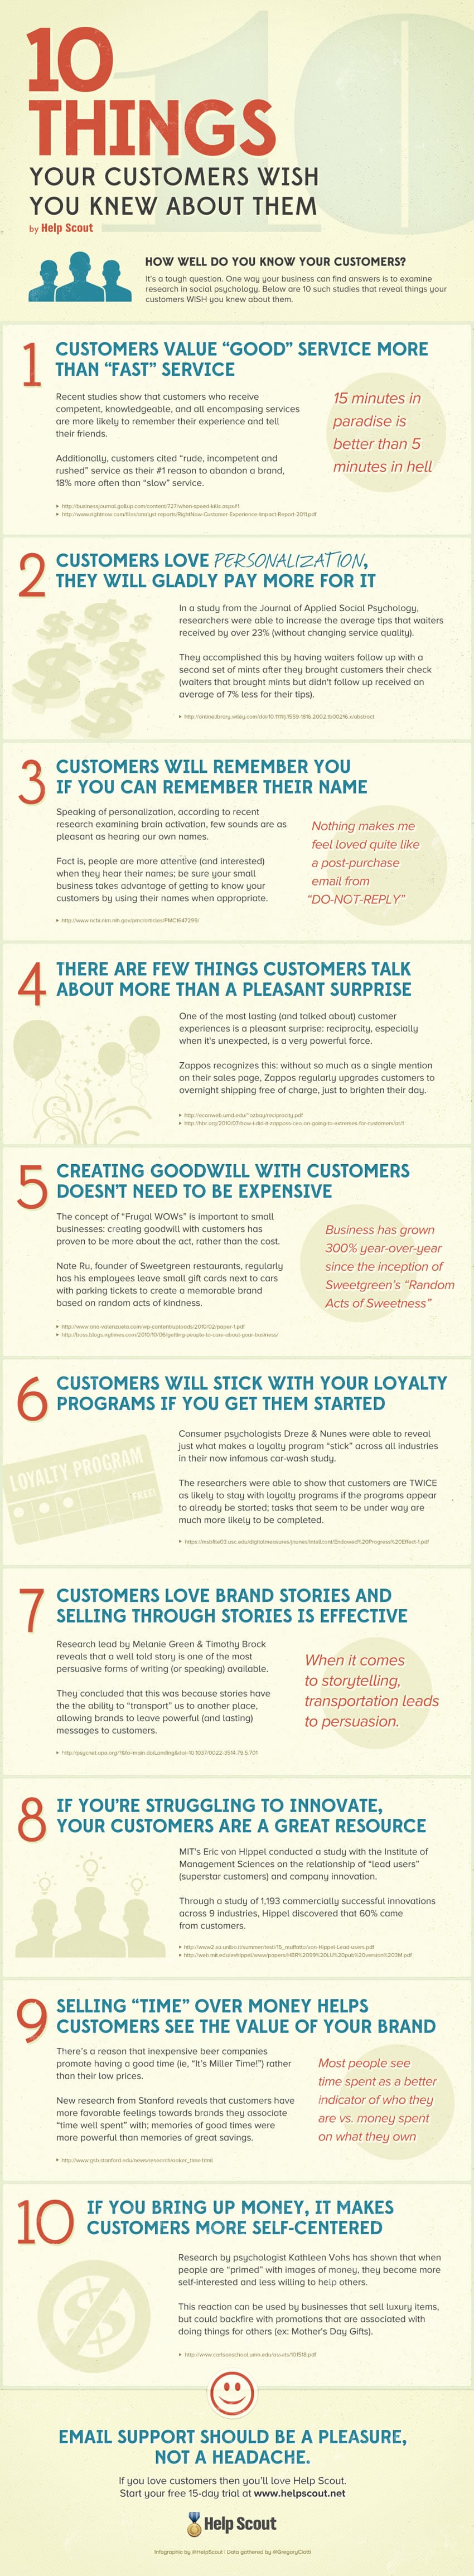 Learn-From-Your-Customers-Infographic